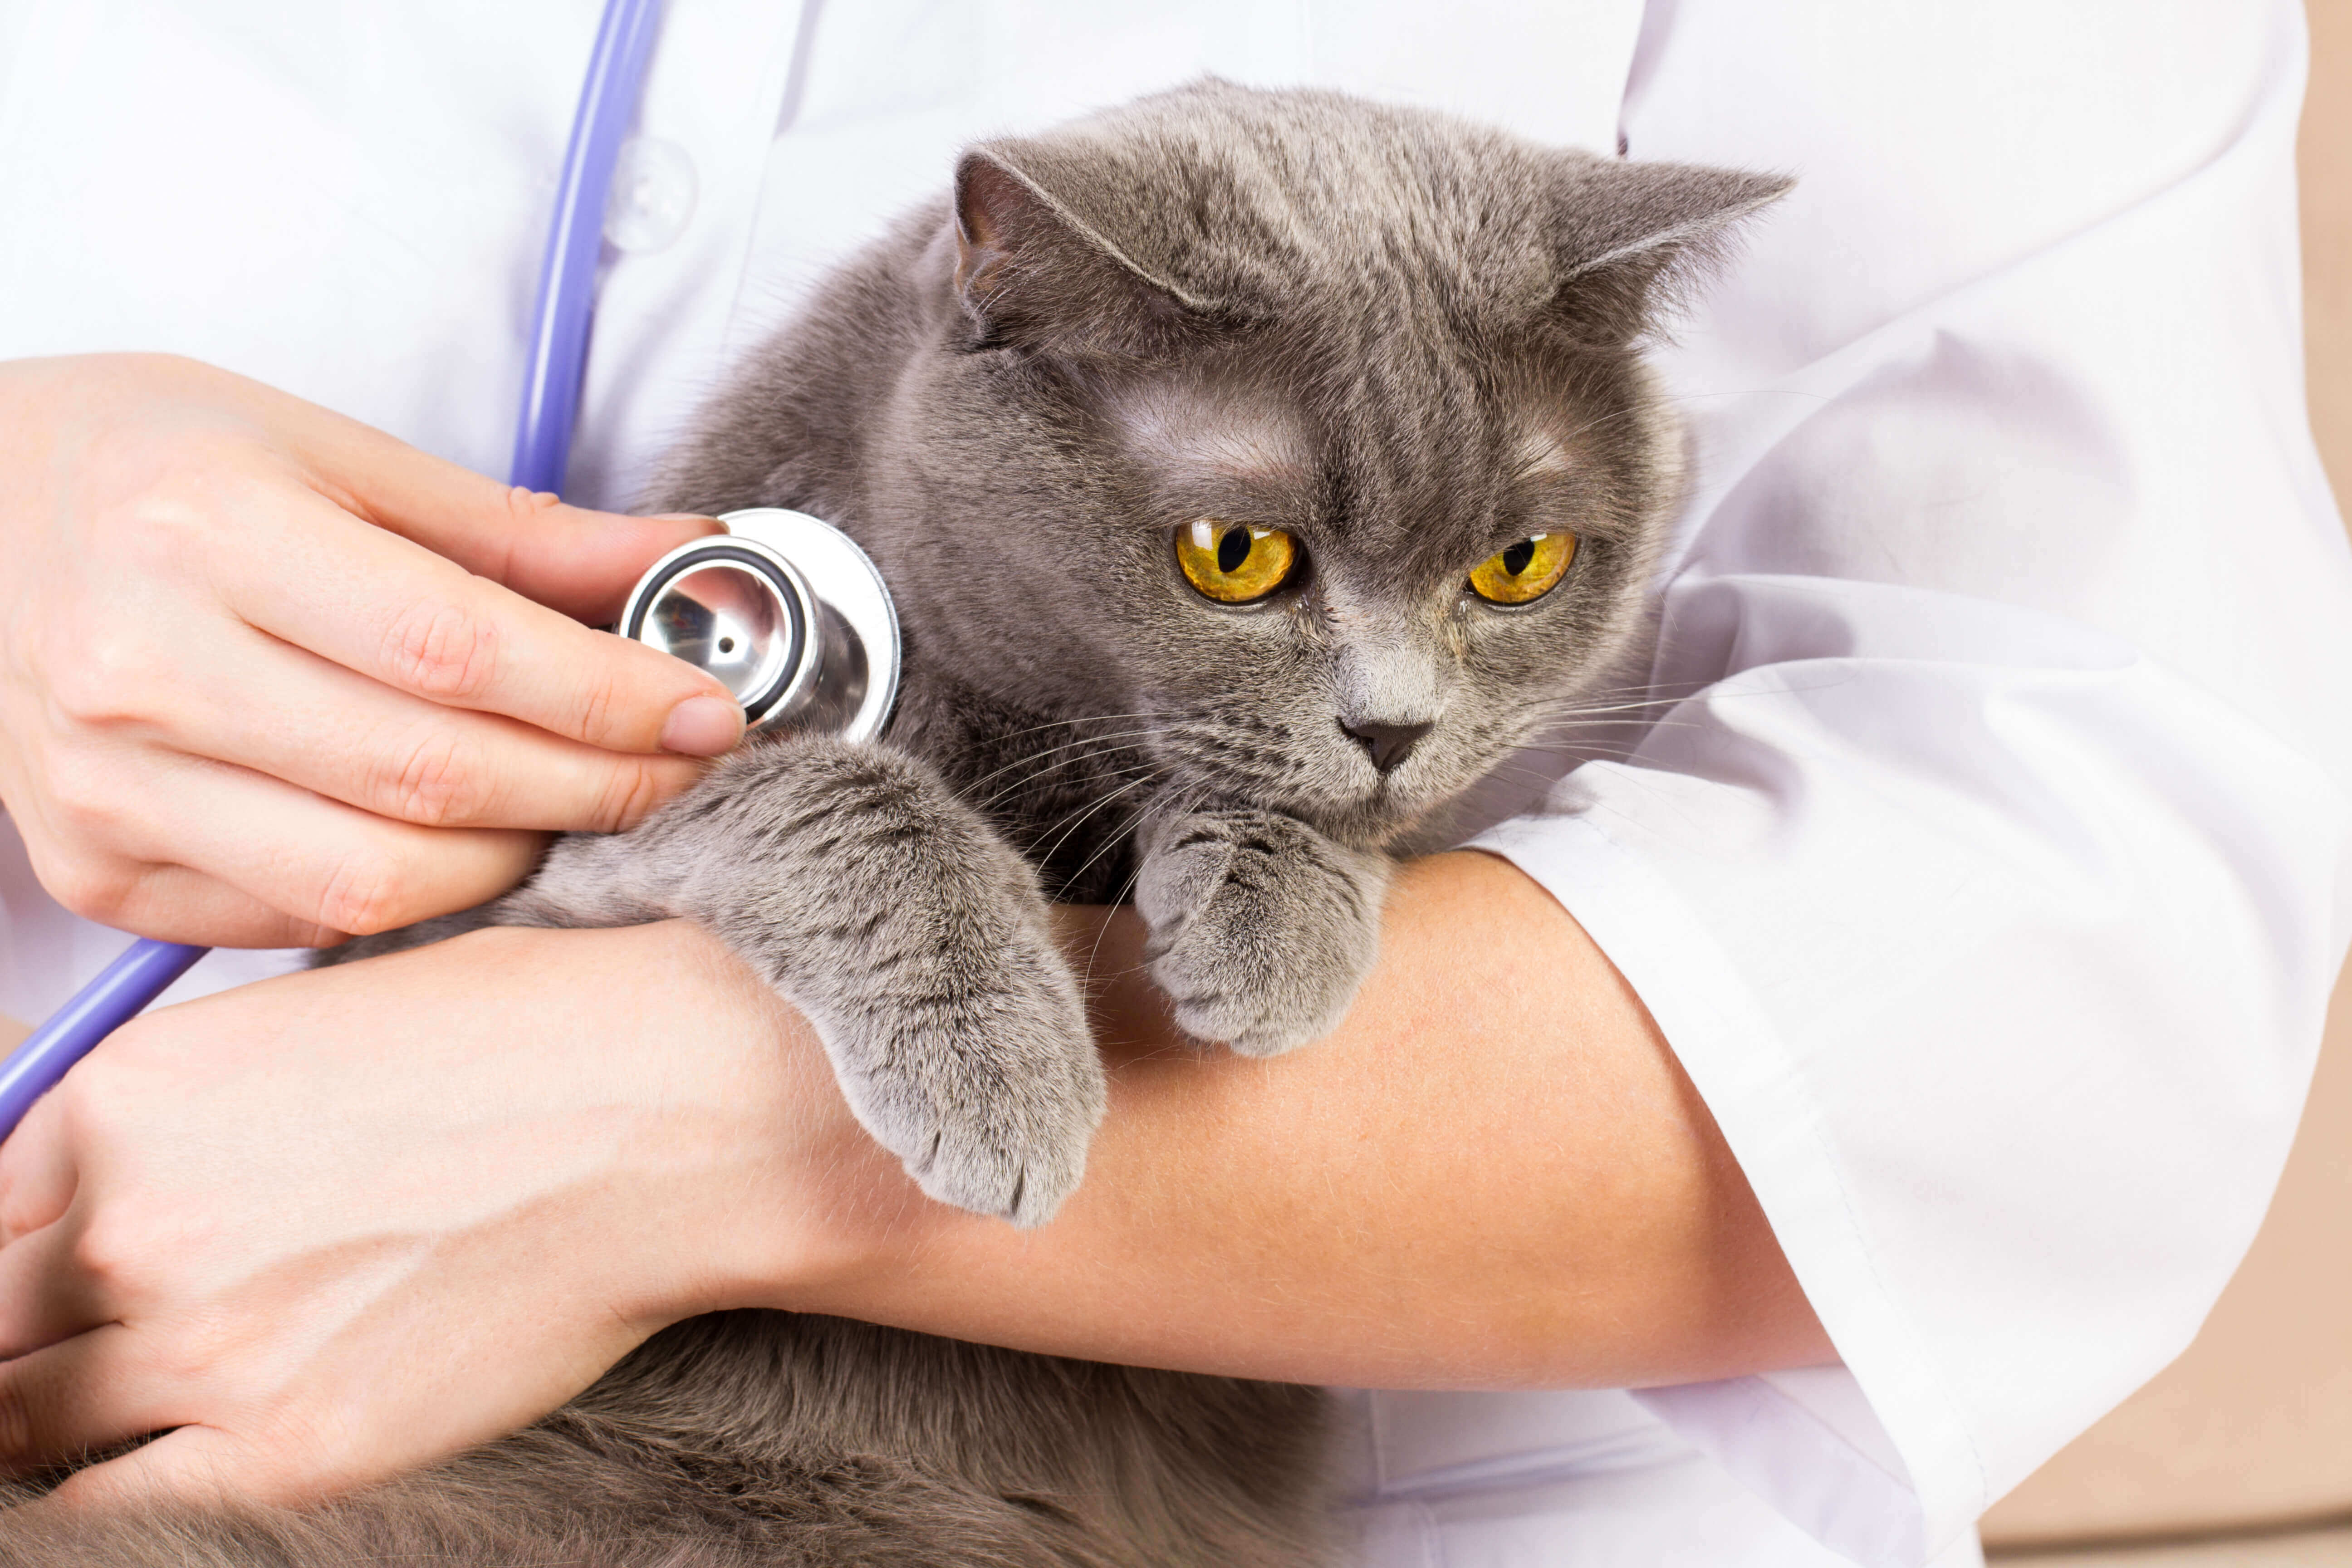 Keep Your Pet’s Healthy in 2016